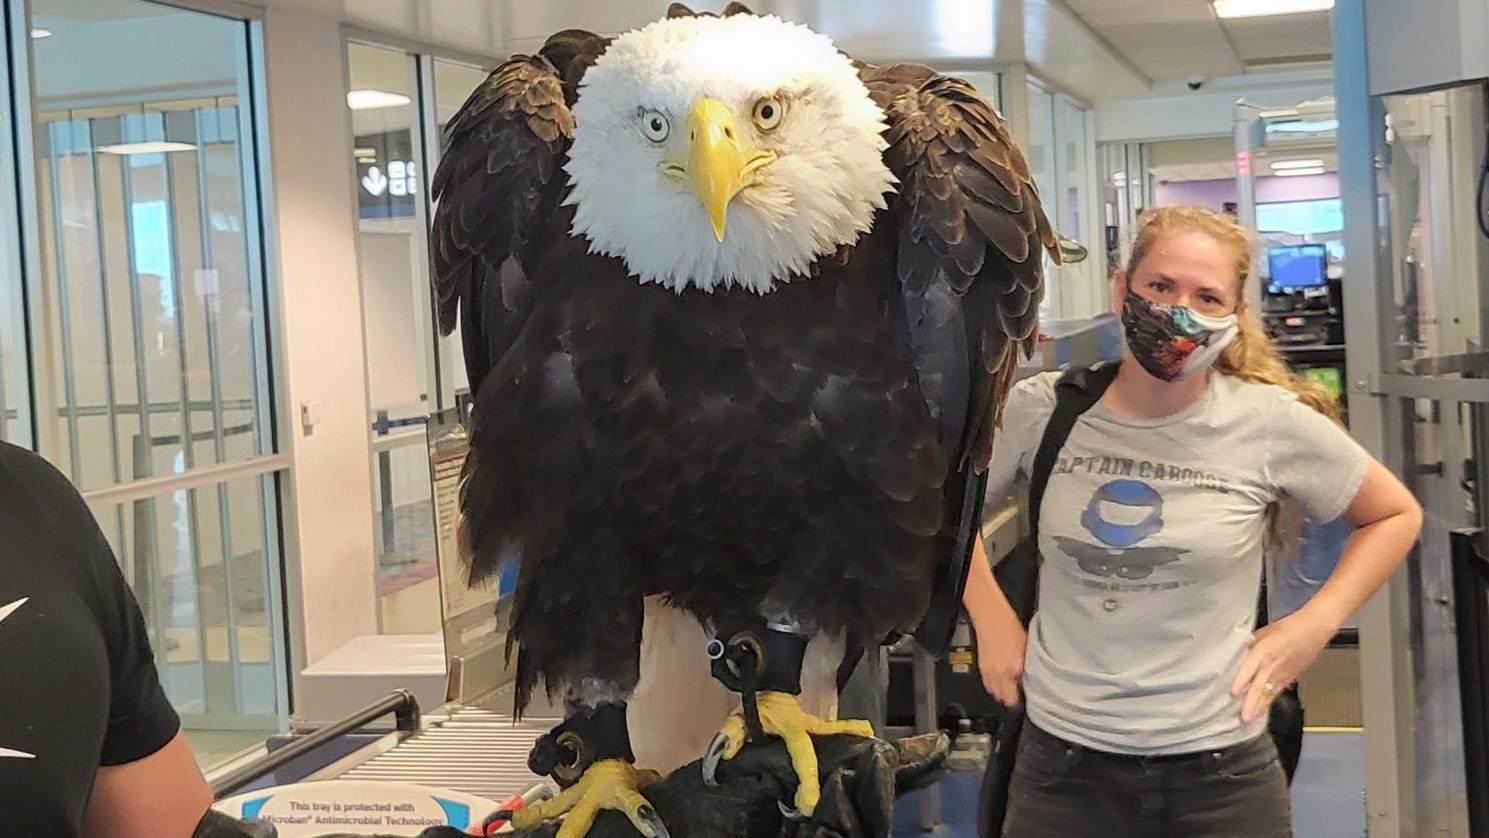 meet-clark-the-19-year-old-bald-eagle-spotted-traveling-through-airport-security